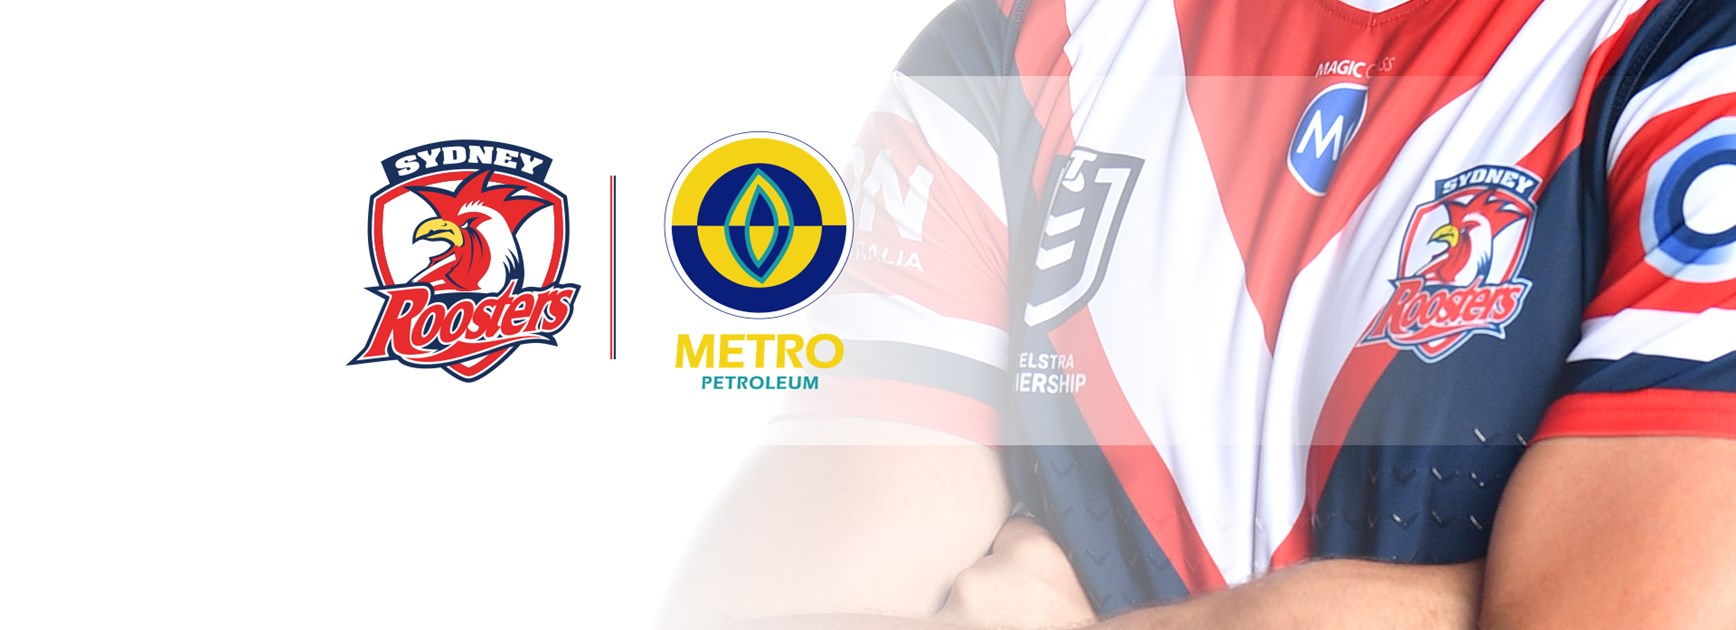 Metro Petroleum Presenting New Partnership with Sydney Roosters